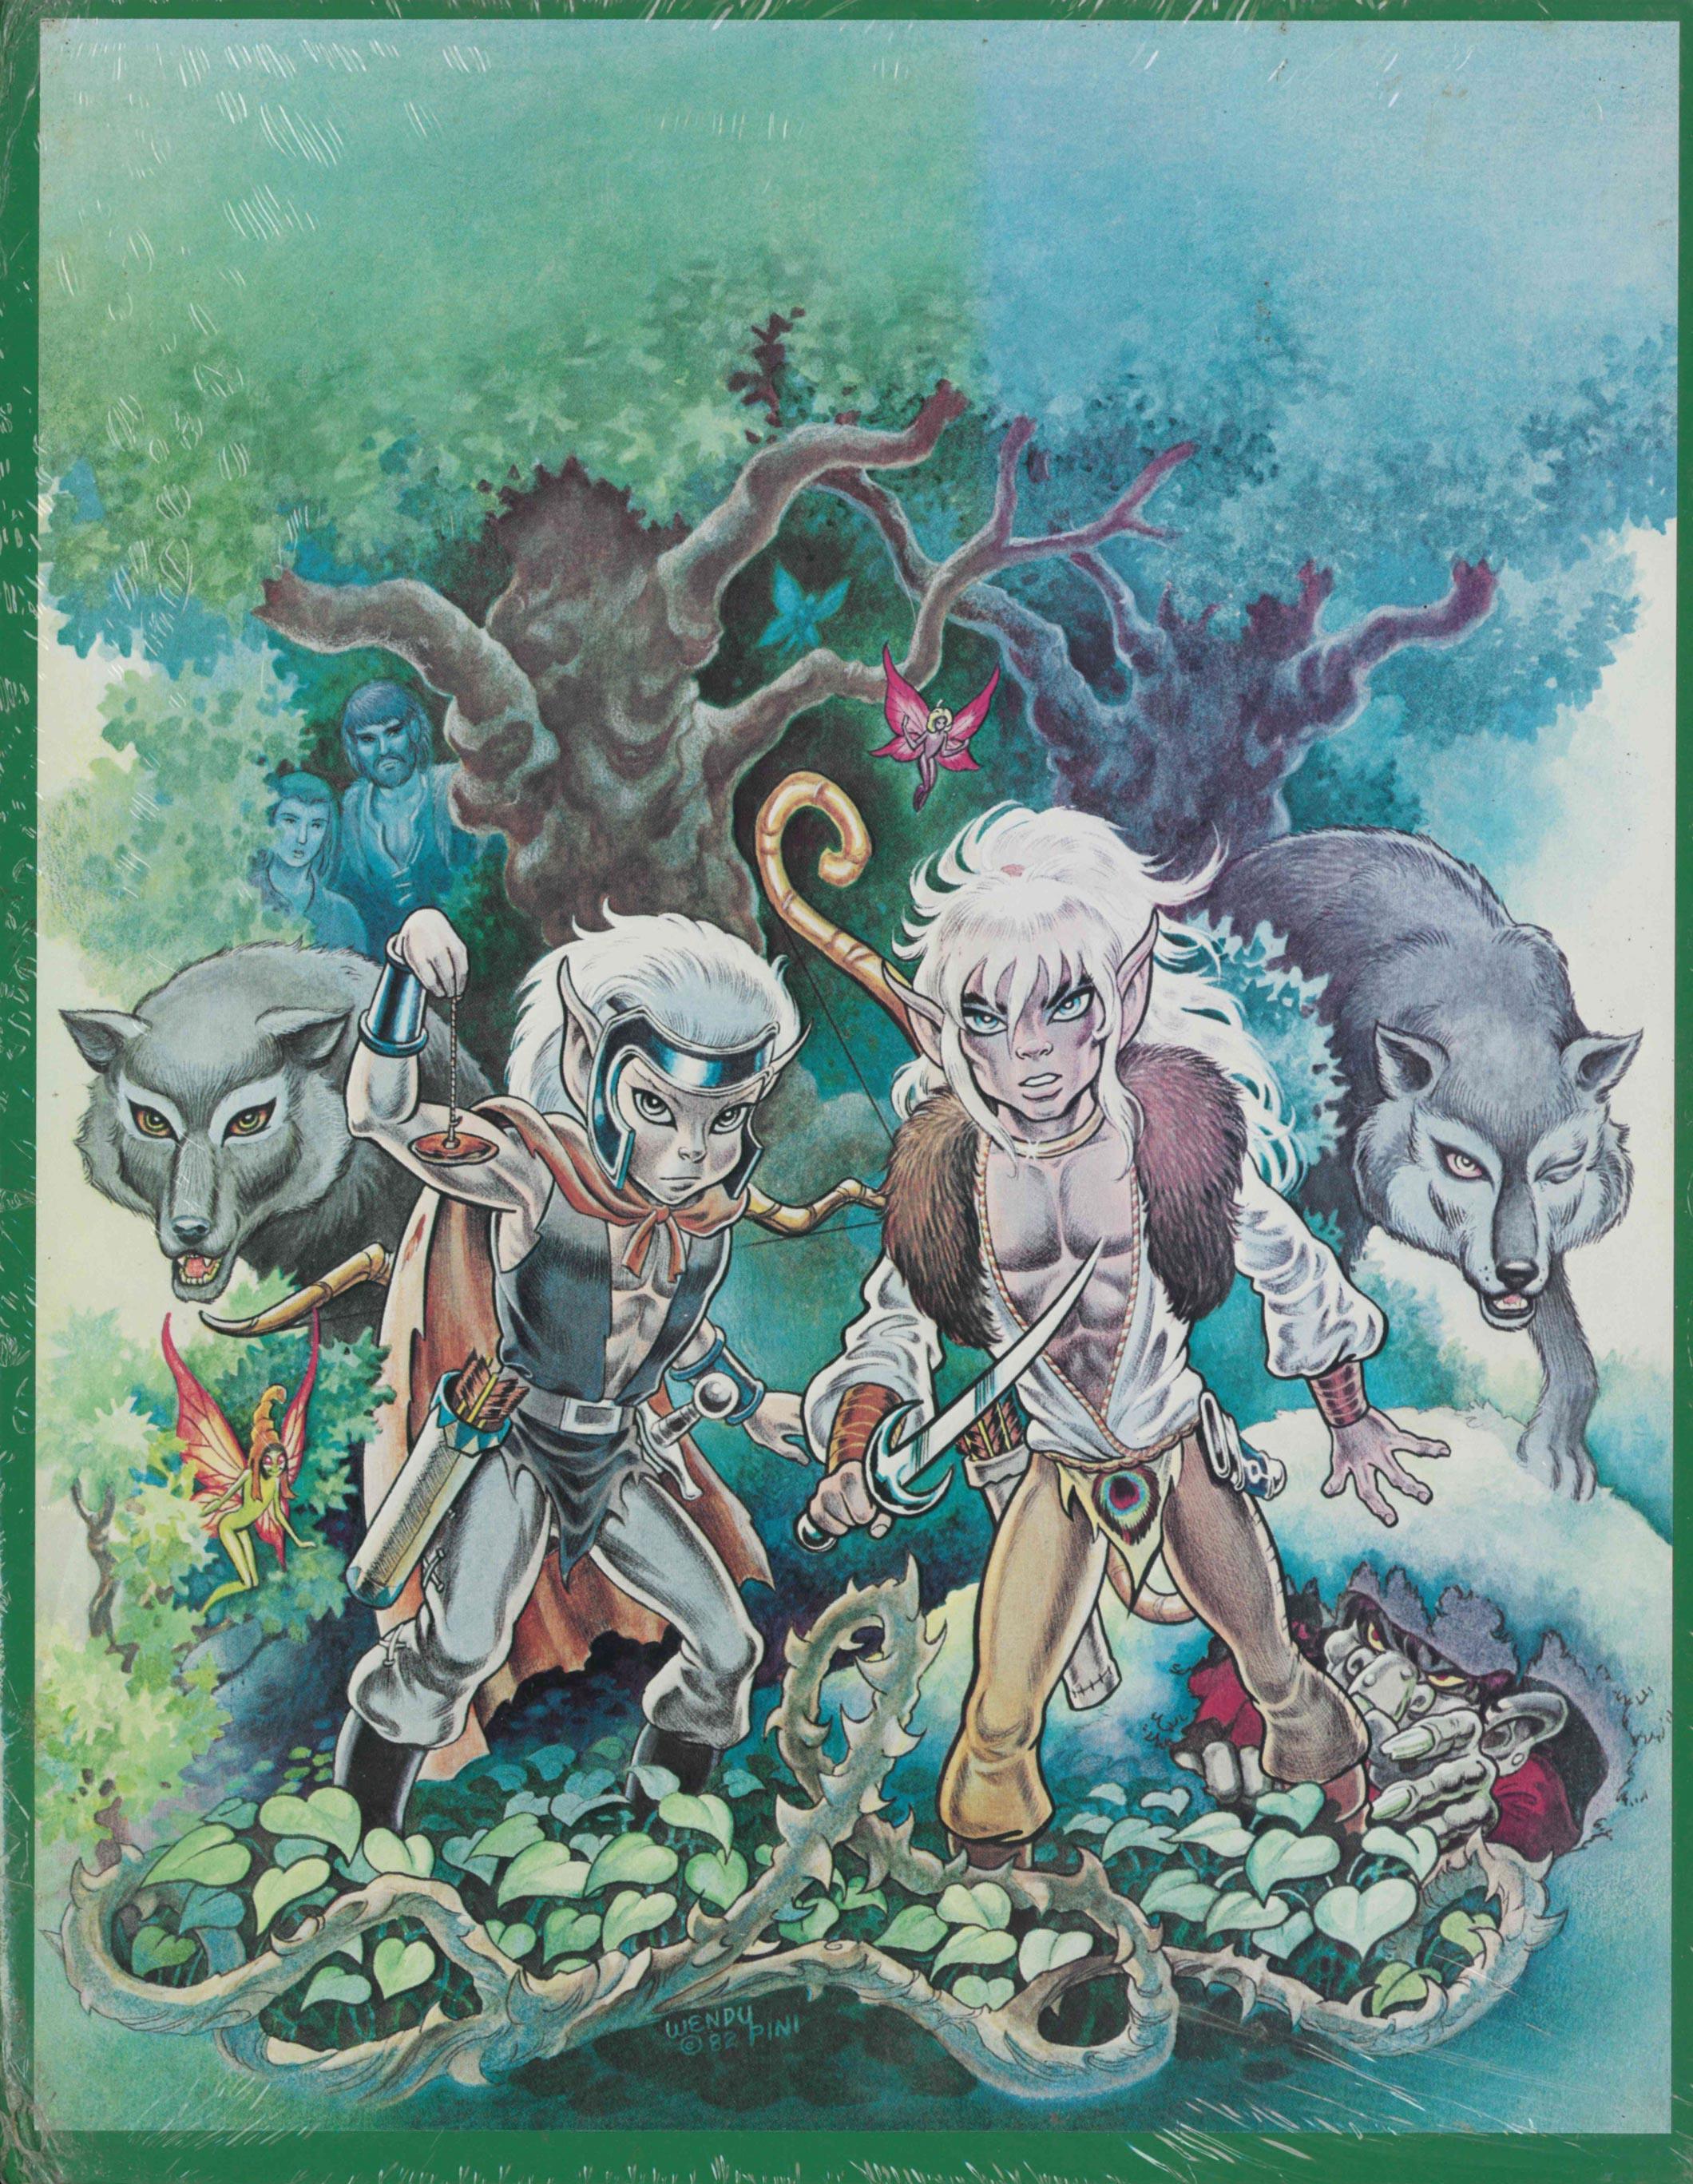 ELFQUEST HC (1982) BOOK 02 LEATHER SLIPCASE SIGNED/NUMBERED EDITION - Kings Comics